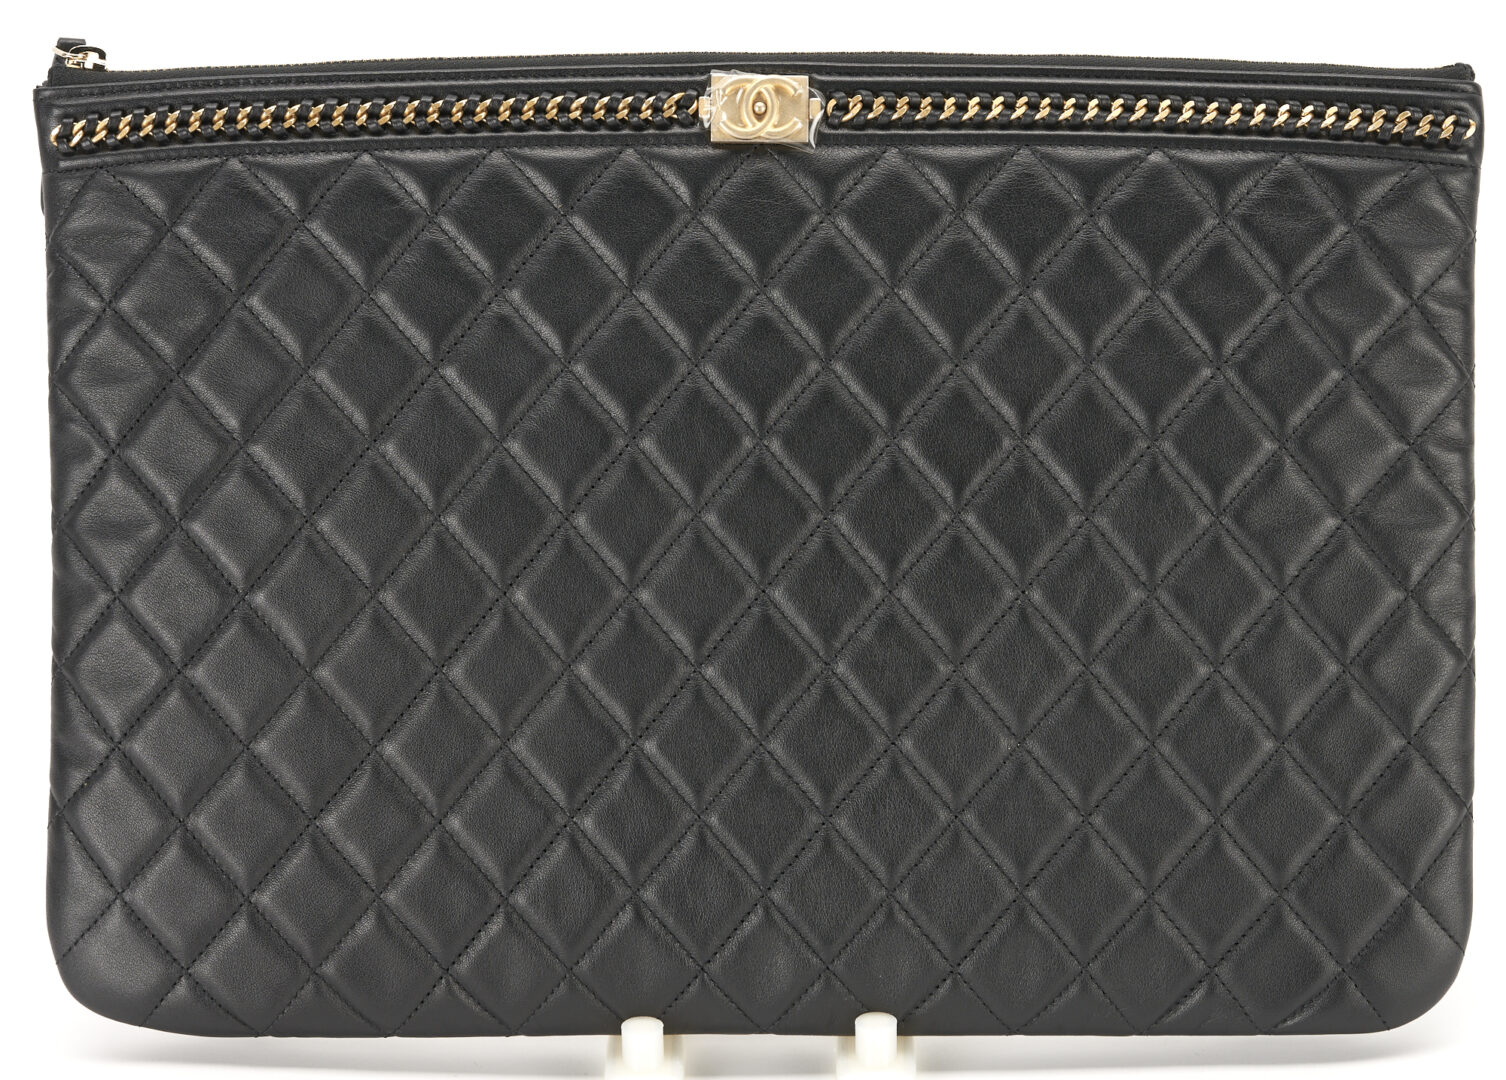 Lot 1173: Chanel Large Boy Quilted Lambskin Zip Pouch